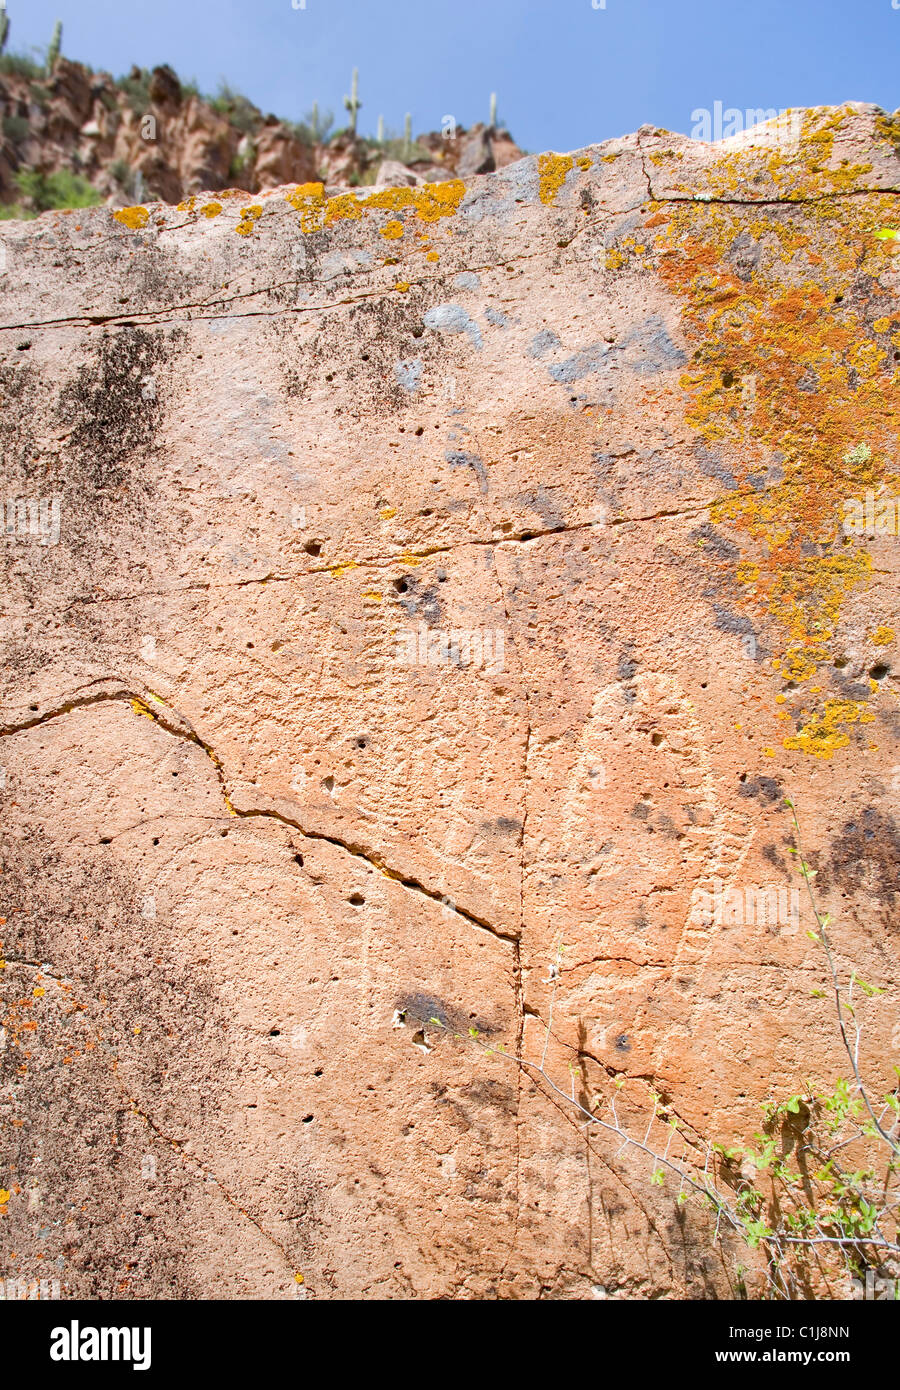 An indian petroglyph map showing water sources and a way around a cliff and waterfall. This was found along the Salt River. Stock Photo